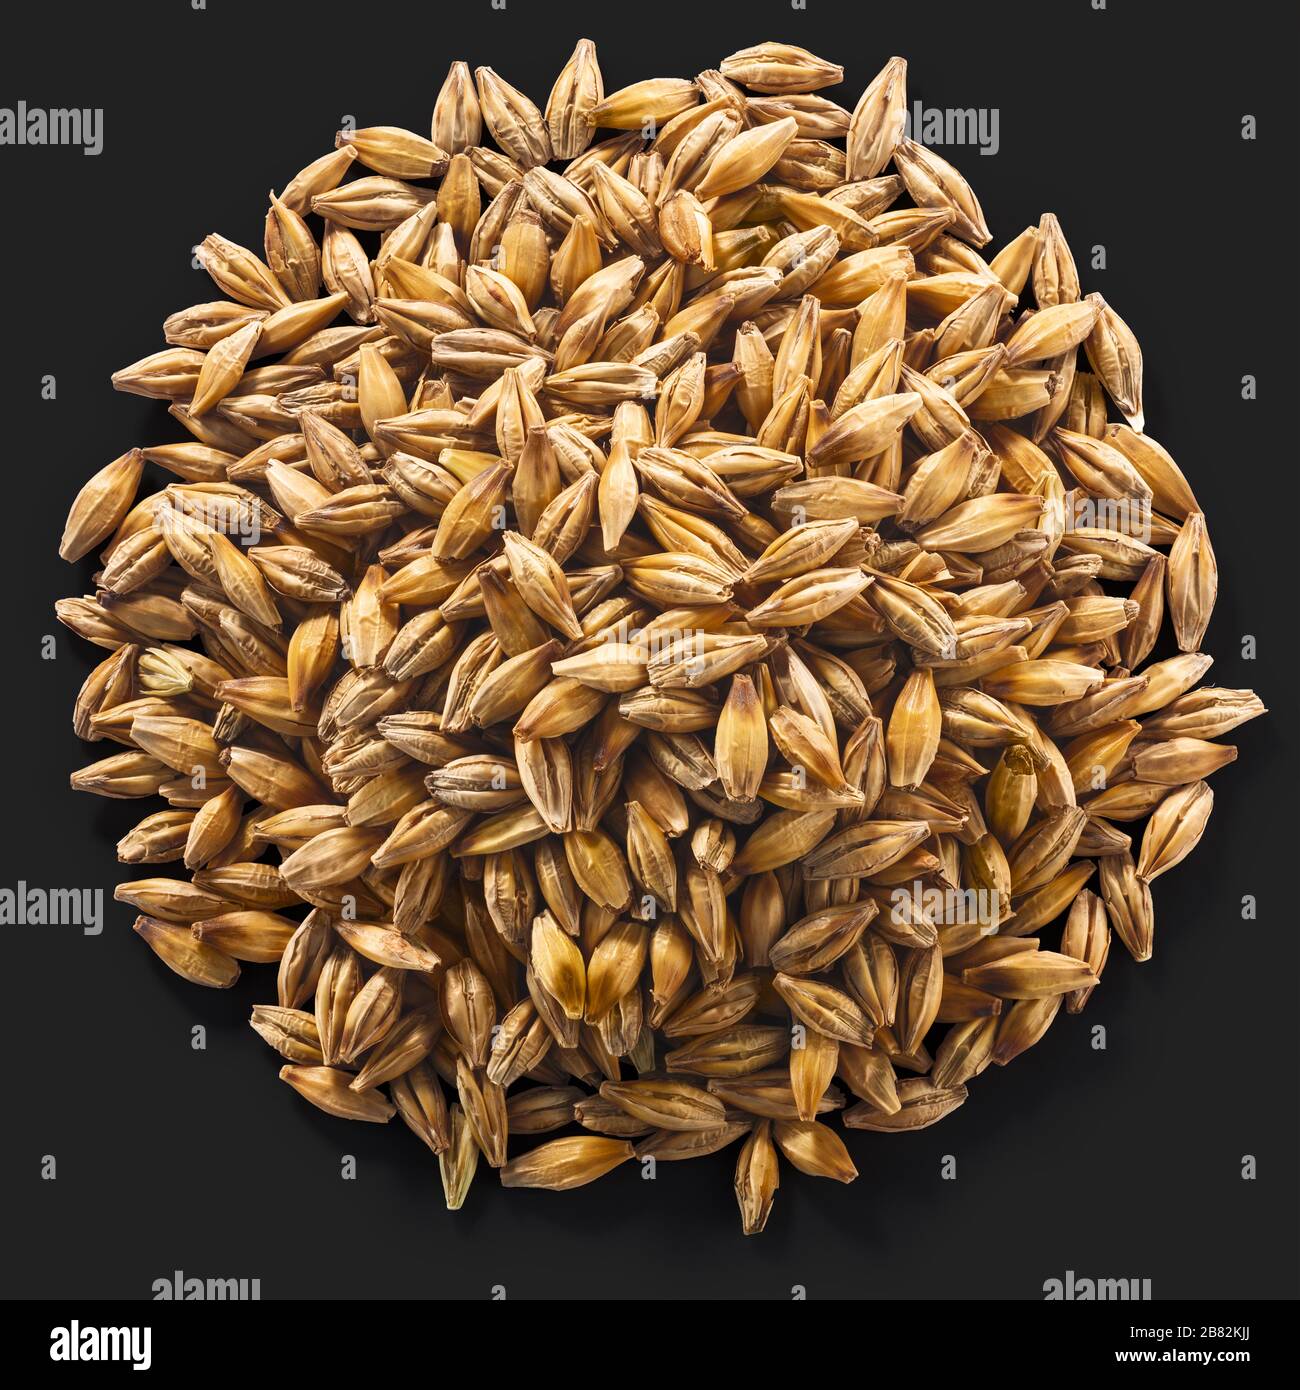 Pile of unhulled Barley (Hordeum vulgare seeds), isolated on black, top view Stock Photo